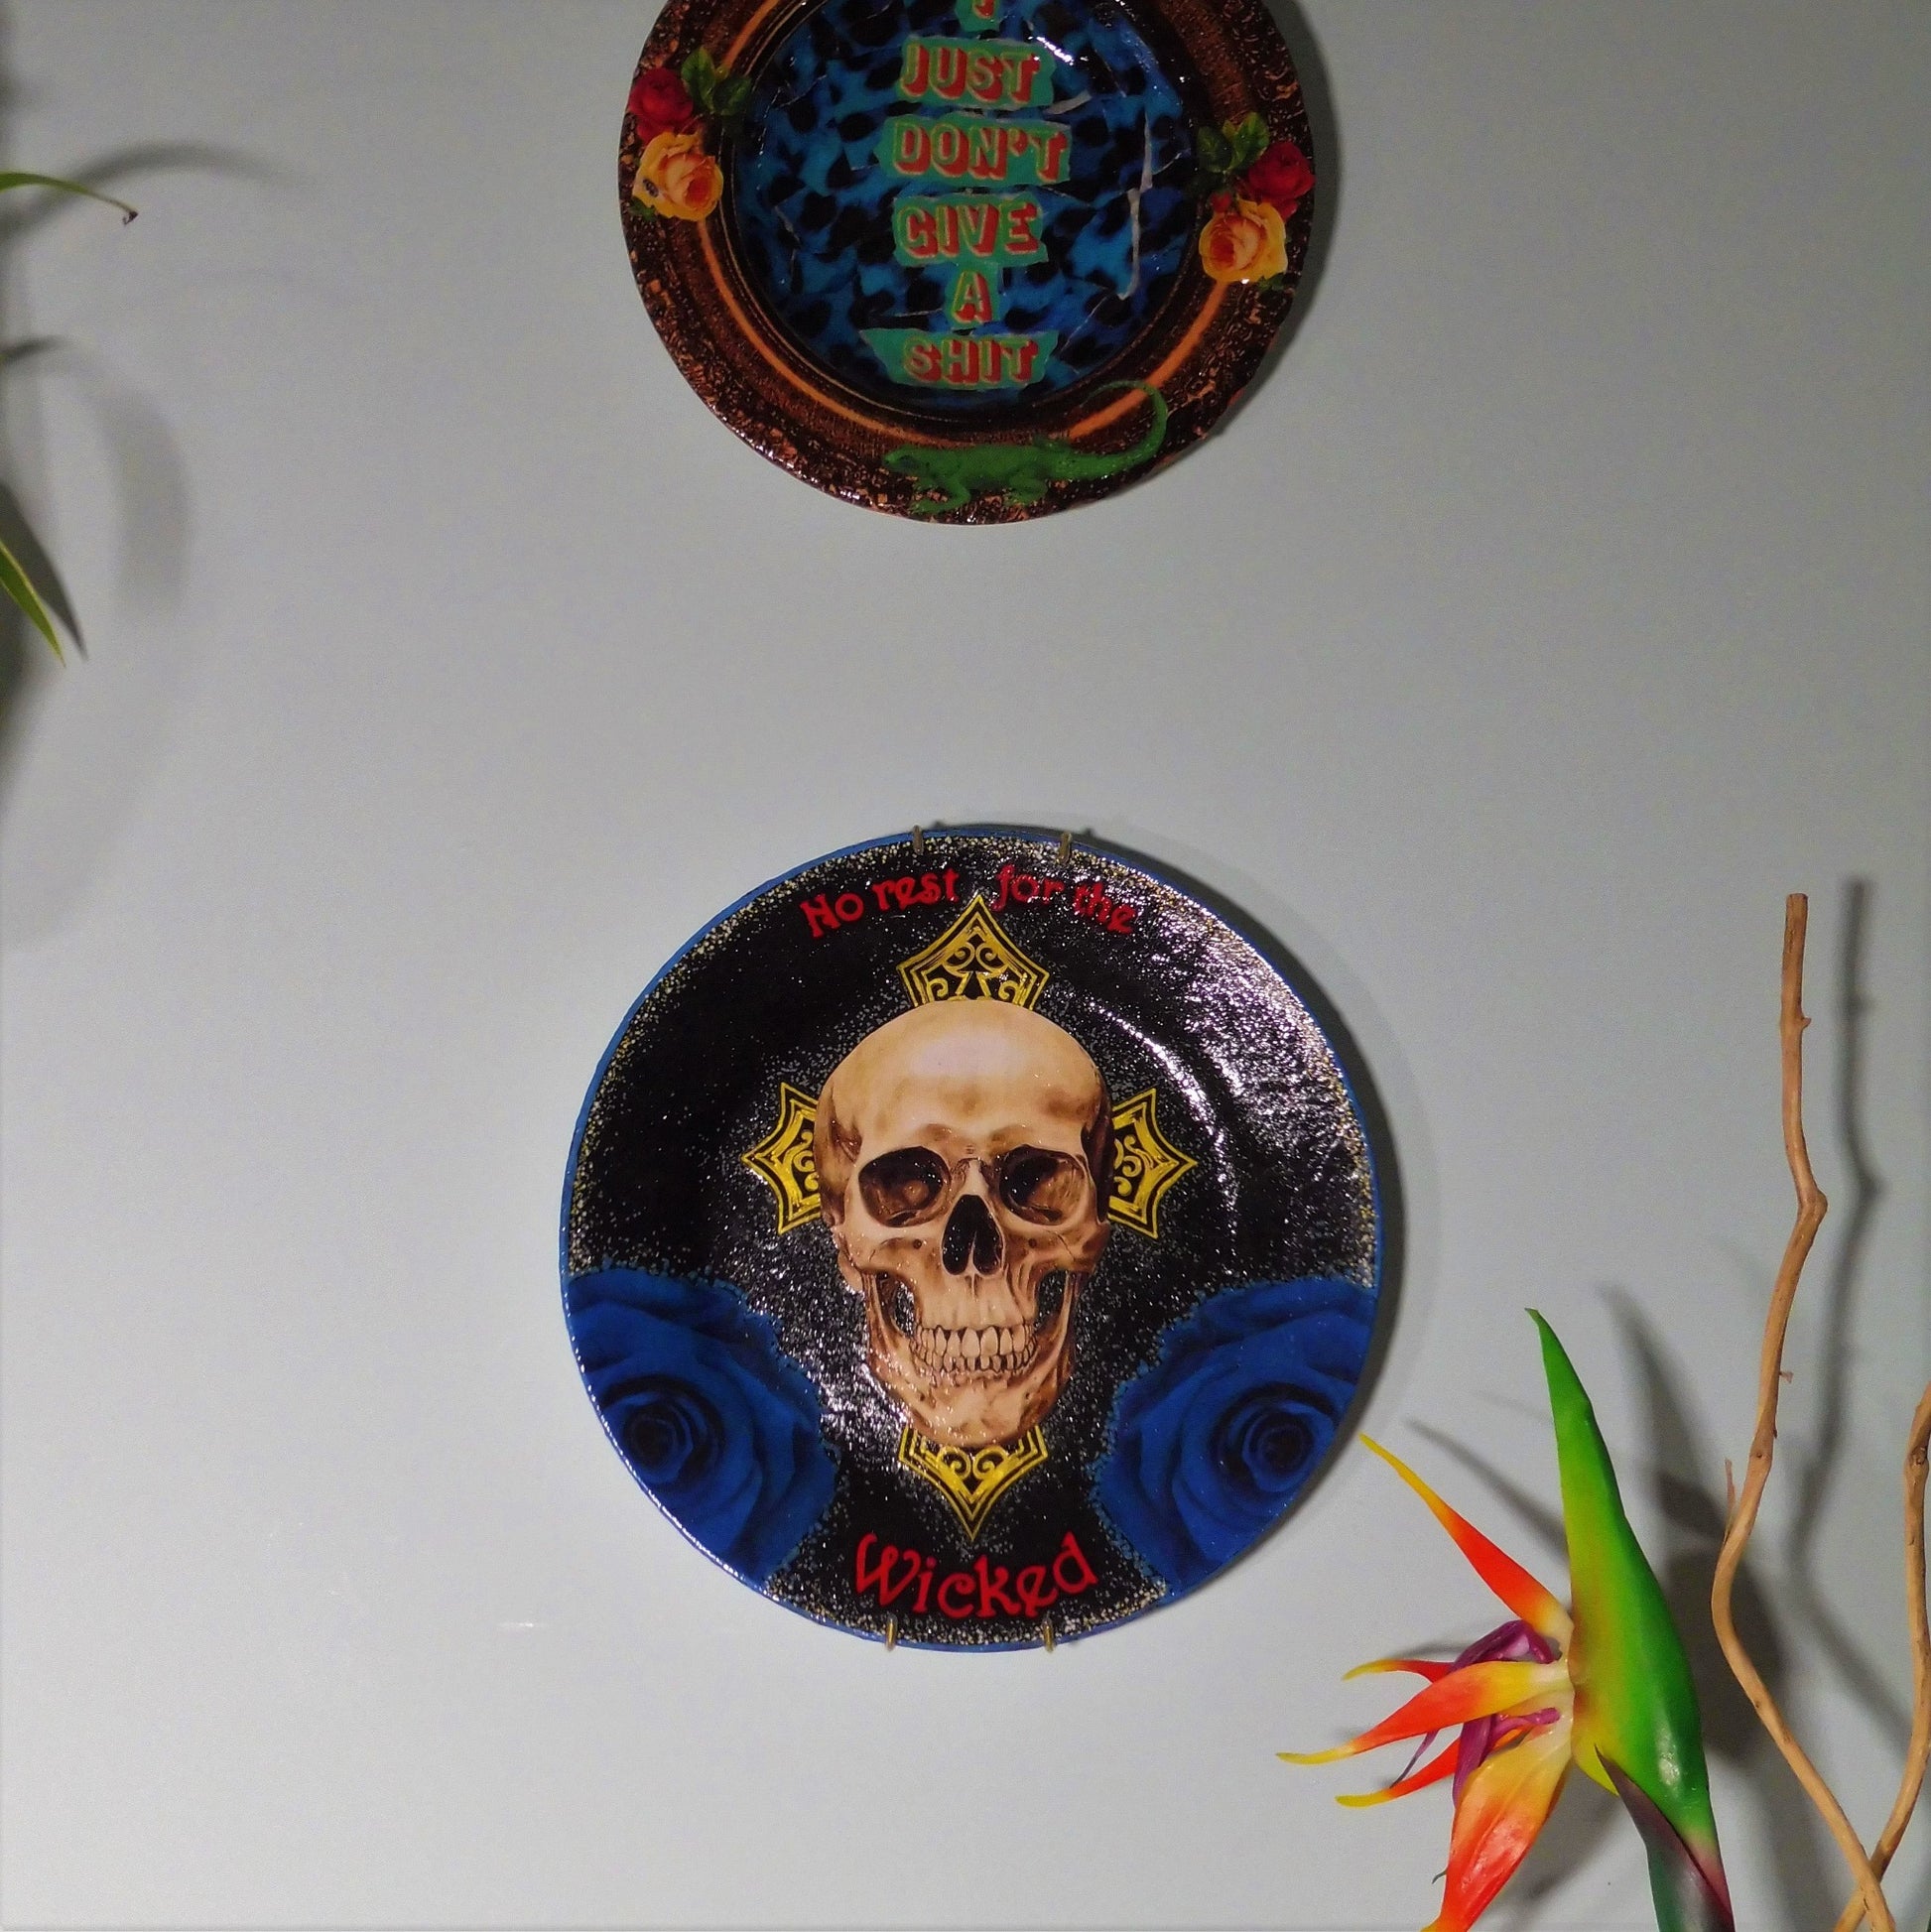 House of Frisson "No Rest For The Wicked" Black Wall Plate front. Collage artwork featuring a skull, a cross, and blue roses, on a black background. Plate hanging on a wall among other plates.